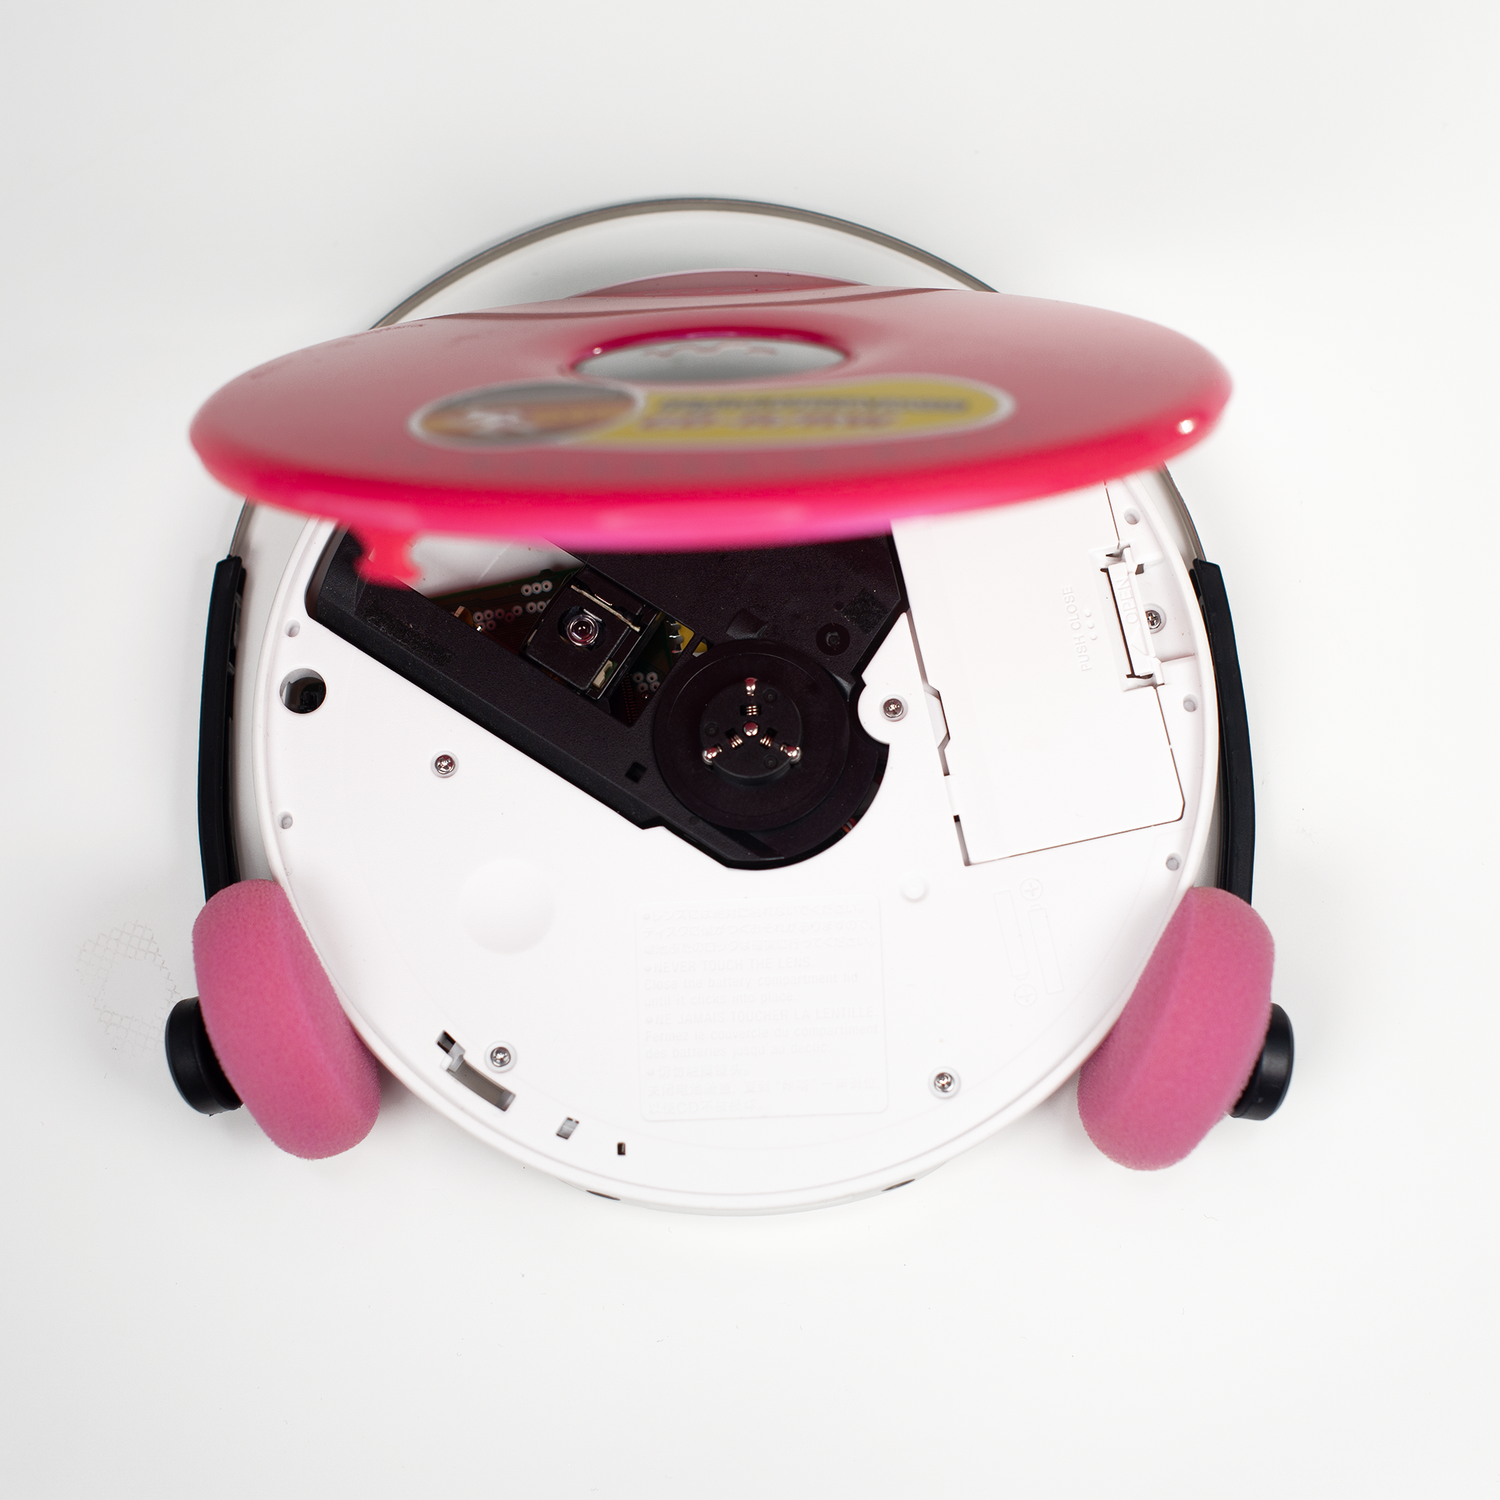 SONY D-EJ010 PINK PORTABLE CD PLAYER